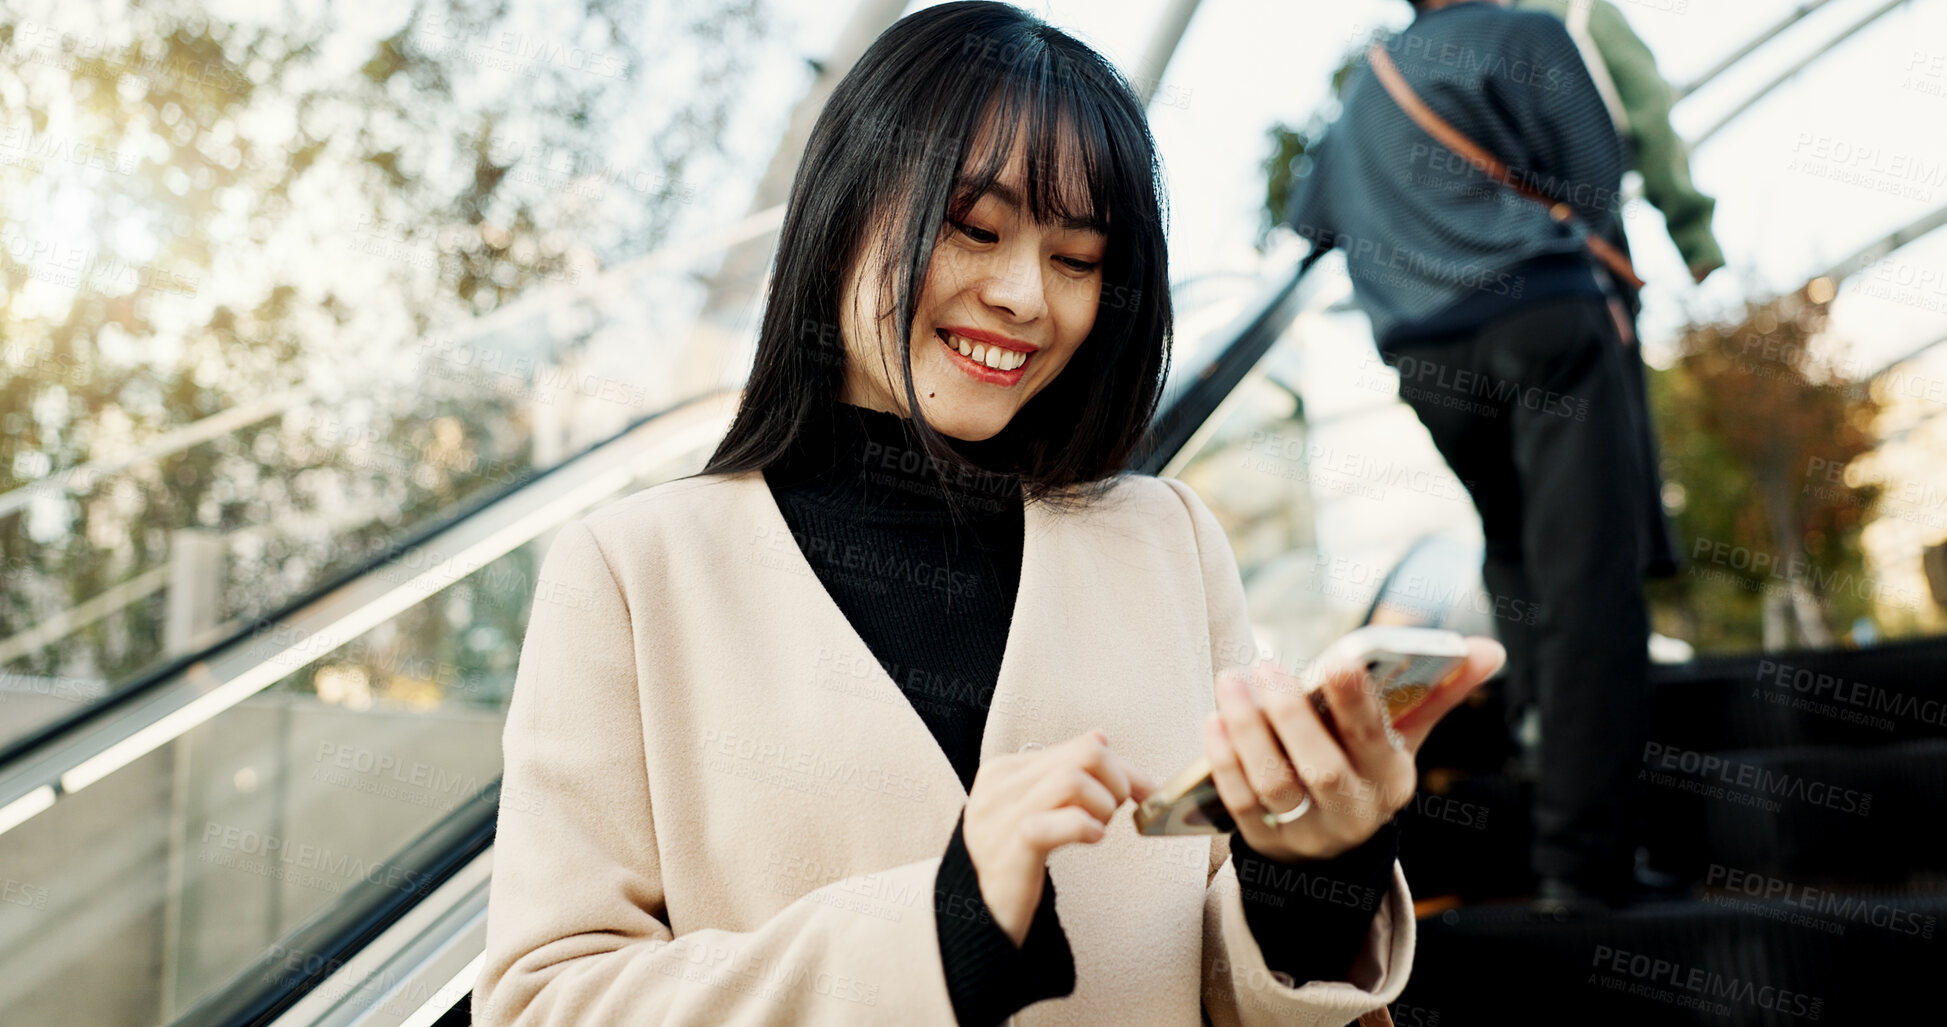 Buy stock photo Smartphone, happy and Japanese woman on escalator in city, social media app or reading email notification on internet technology in Tokyo. Phone, mobile and person smile outdoor to travel or commute